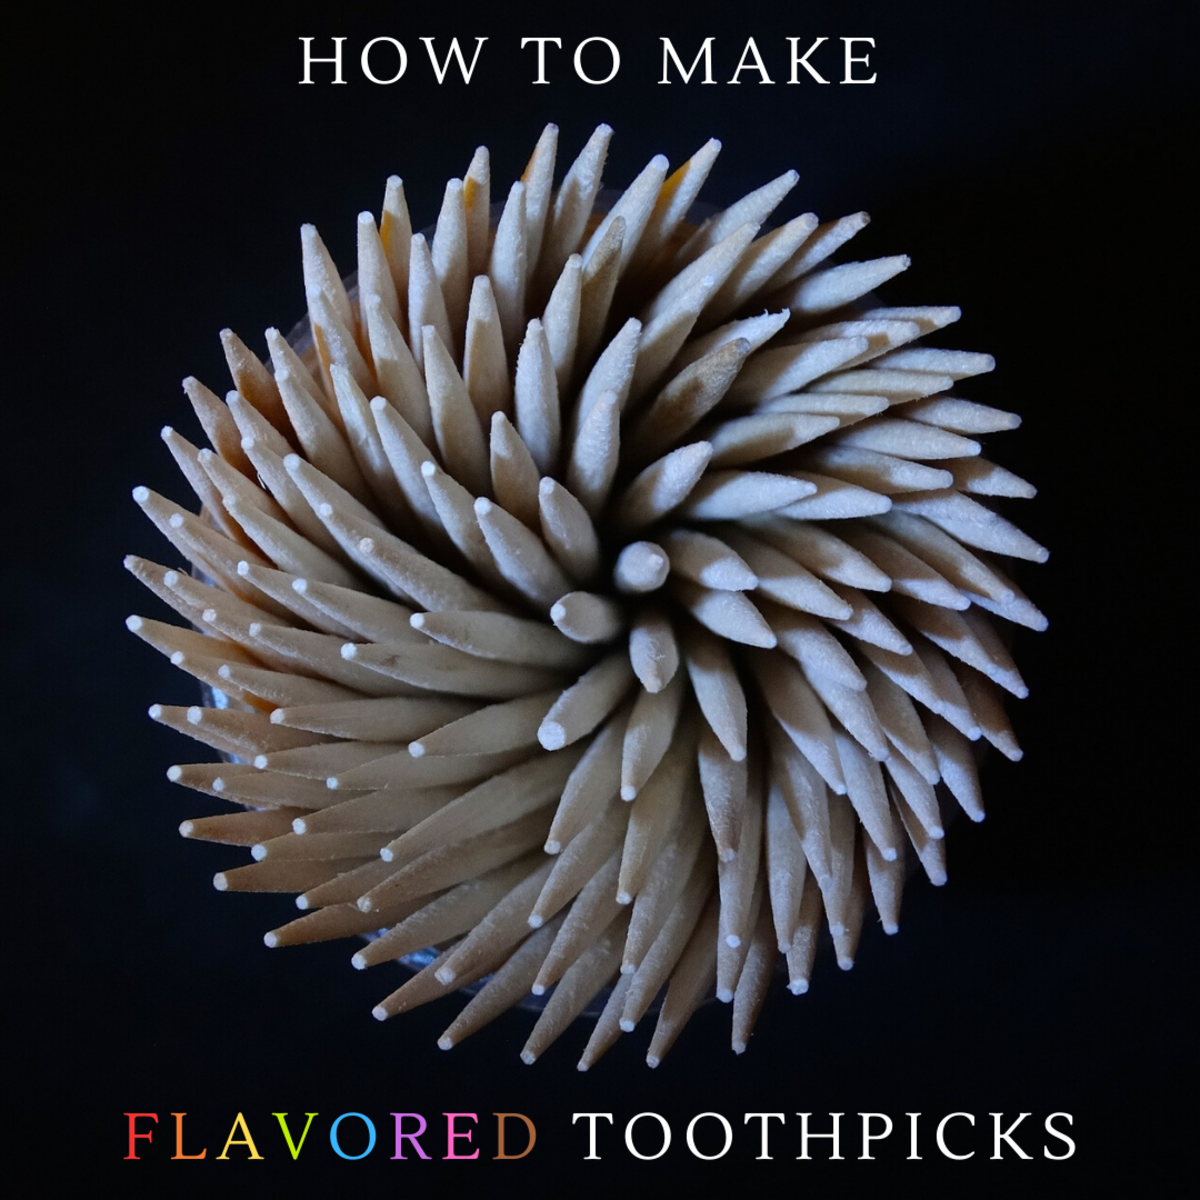 This article will break down just how easy it is to make your own flavored toothpicks.